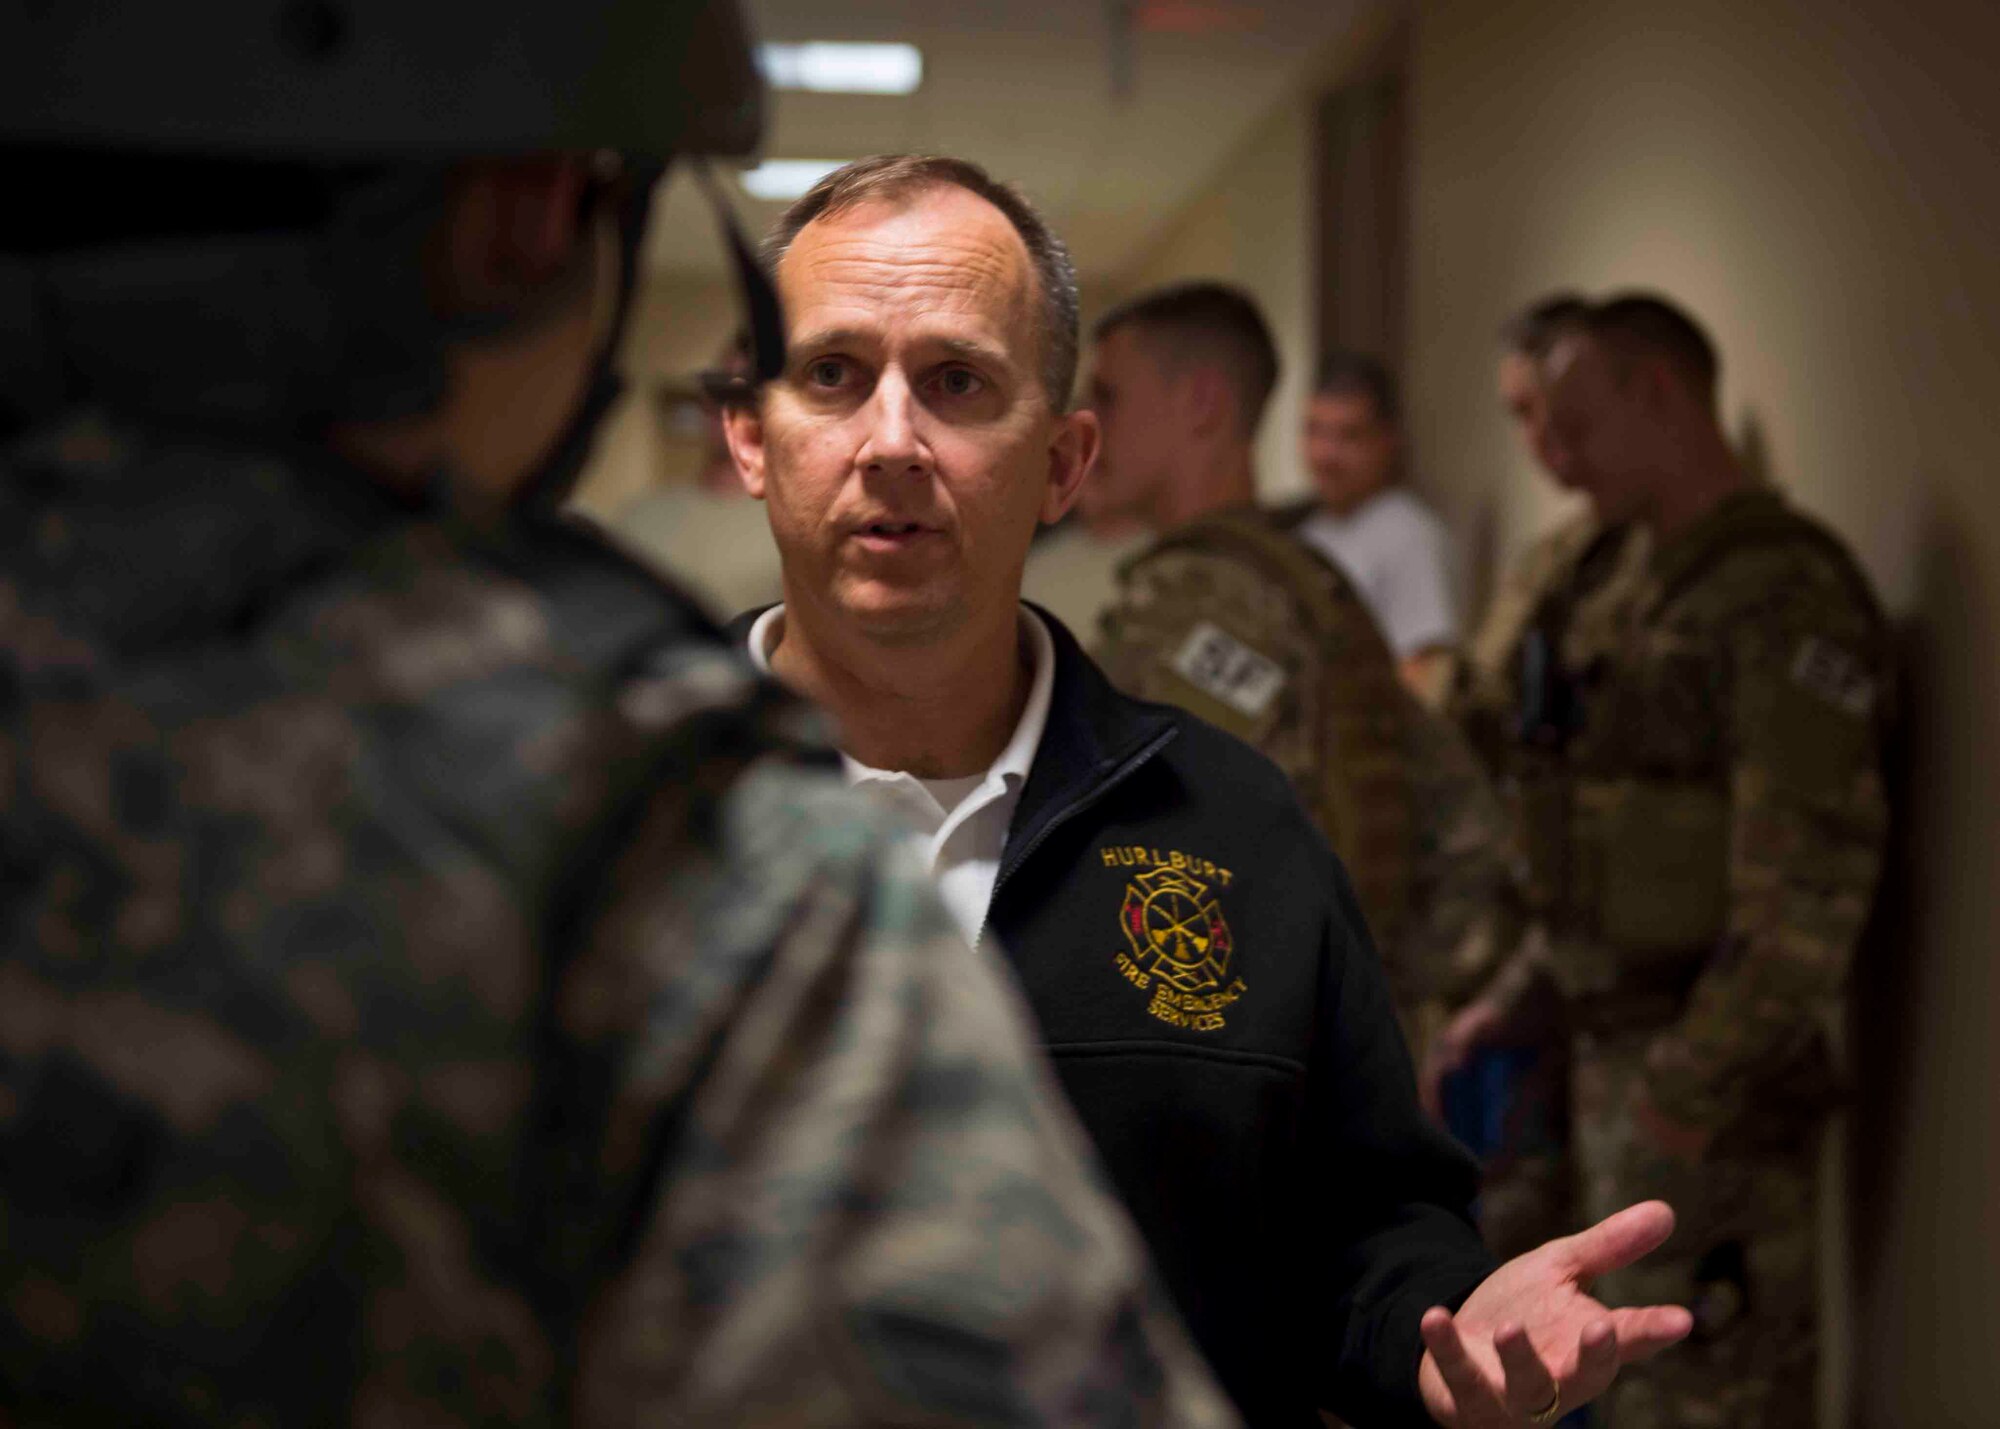 Christopher Maxwell, assistant fire chief of training for the 1st Special Operations Civil Engineer Squadron, explains procedures to an Air Commando during an active shooter exercise at Hurlburt Field, Fla., March 10, 2017. The exercise was held to implement new procedures for tactical responders and aide in increasing survival chances of wounded victims. (U.S. Air Force photo by Senior Airman Krystal M. Garrett)